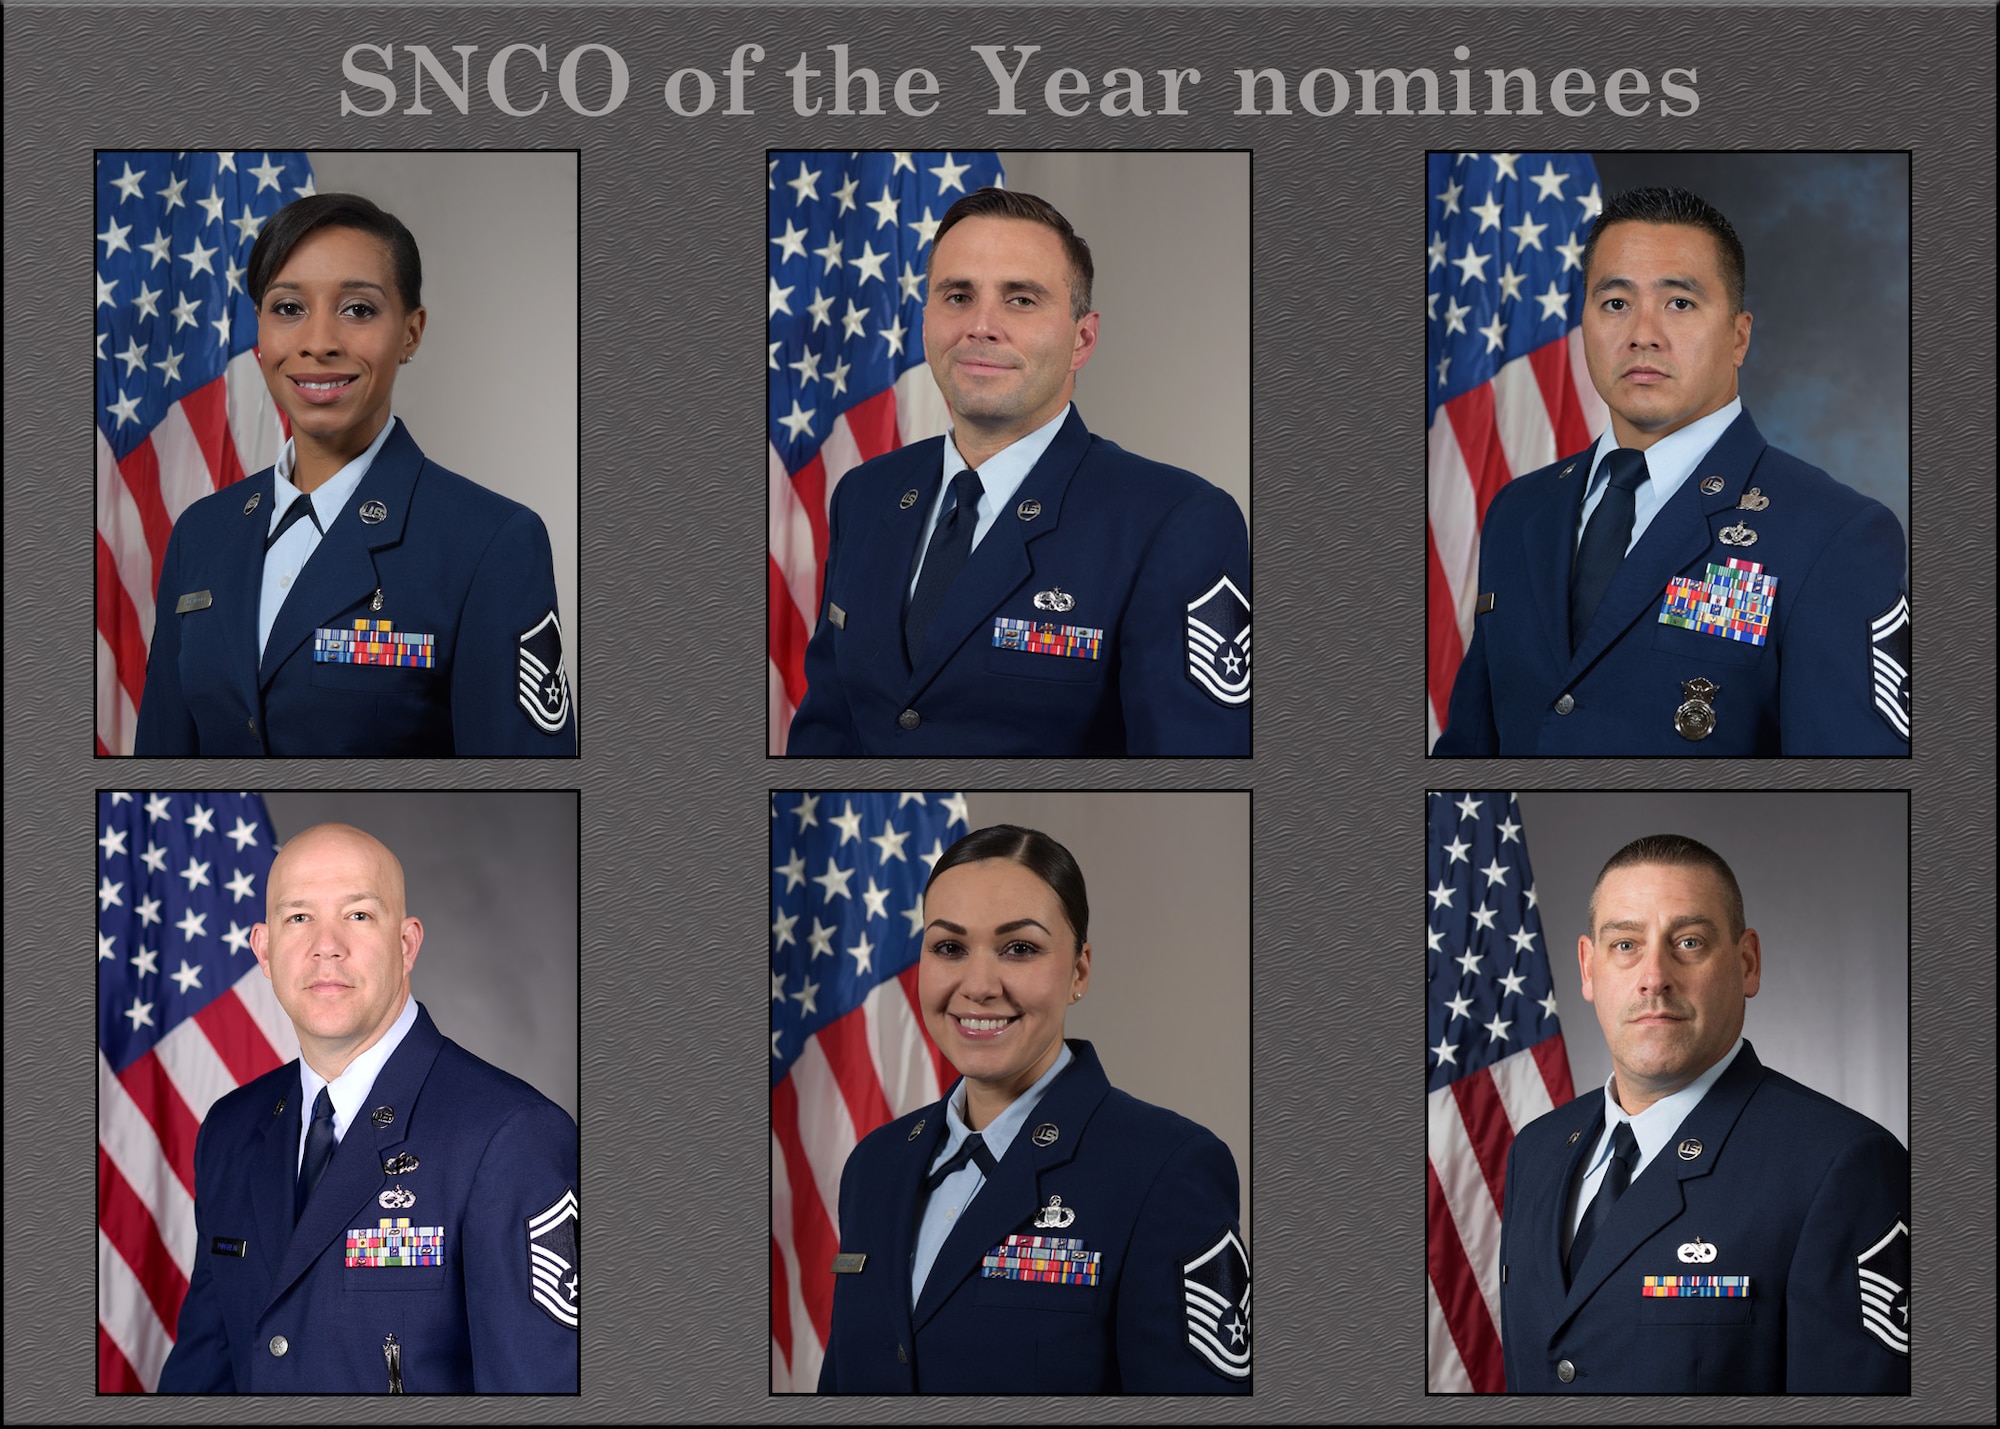 The 944th Fighter Wing is built on the foundation of our outstanding Airmen. We are proud of the diligence and commitment these Elite Reserve Citizen Airmen display and are pleased to highlight those who have been nominated for the 2020 944 FW Annual Awards.